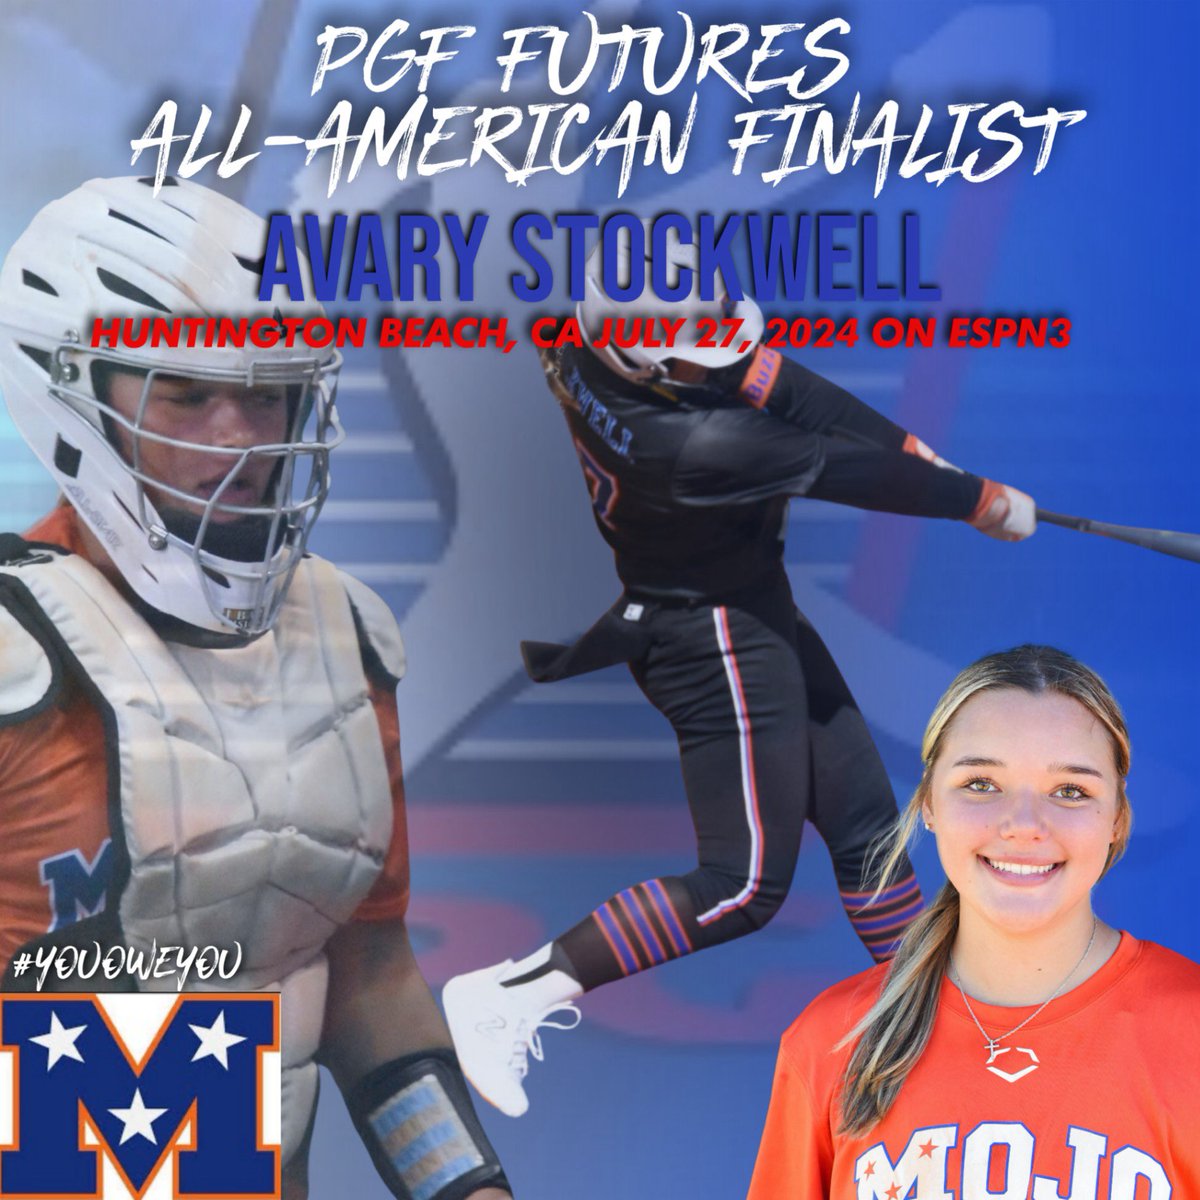 Thank you @PGFnetwork for naming 3 of our athletes FINALISTS for the PGF Futures All-American Game! Big congrats to @kensiarringdale, @hallebailey2026, & @AvaryStockwell! This is a much-deserved accomplishment for these 3 who are at the top of the ‘26 class in the nation. 🧡💙👏🏼